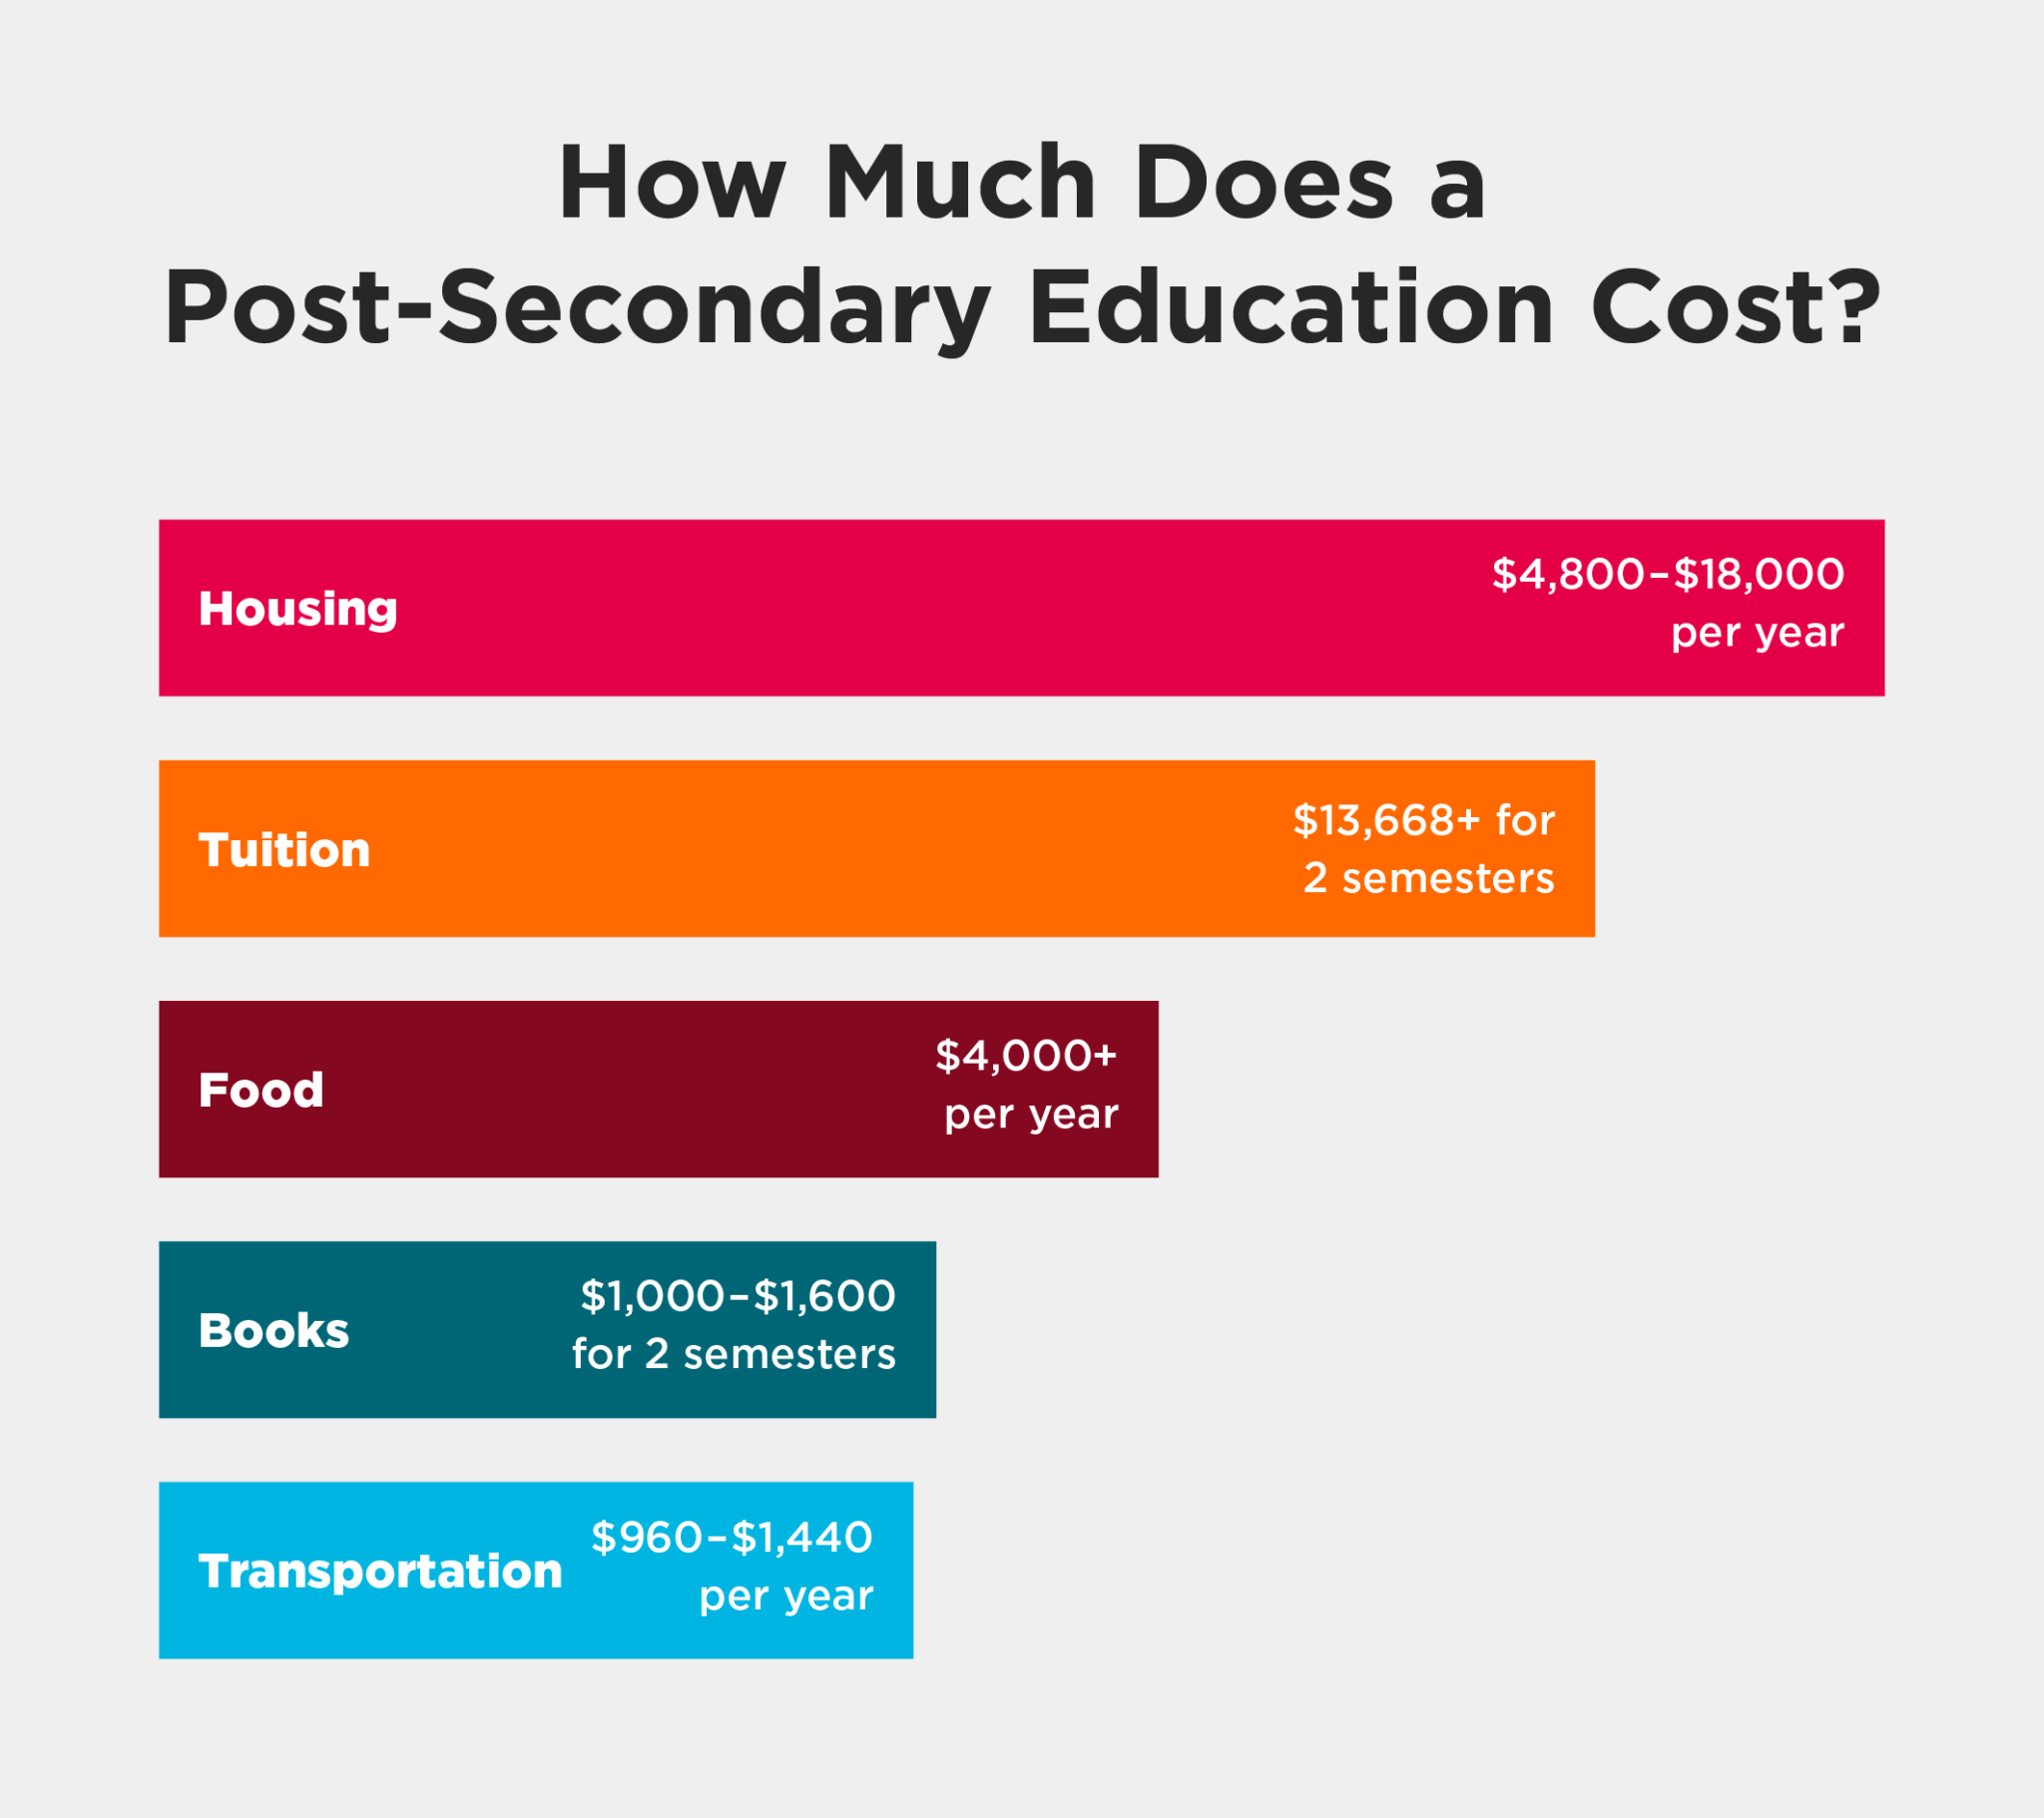 post secondary education means in canada